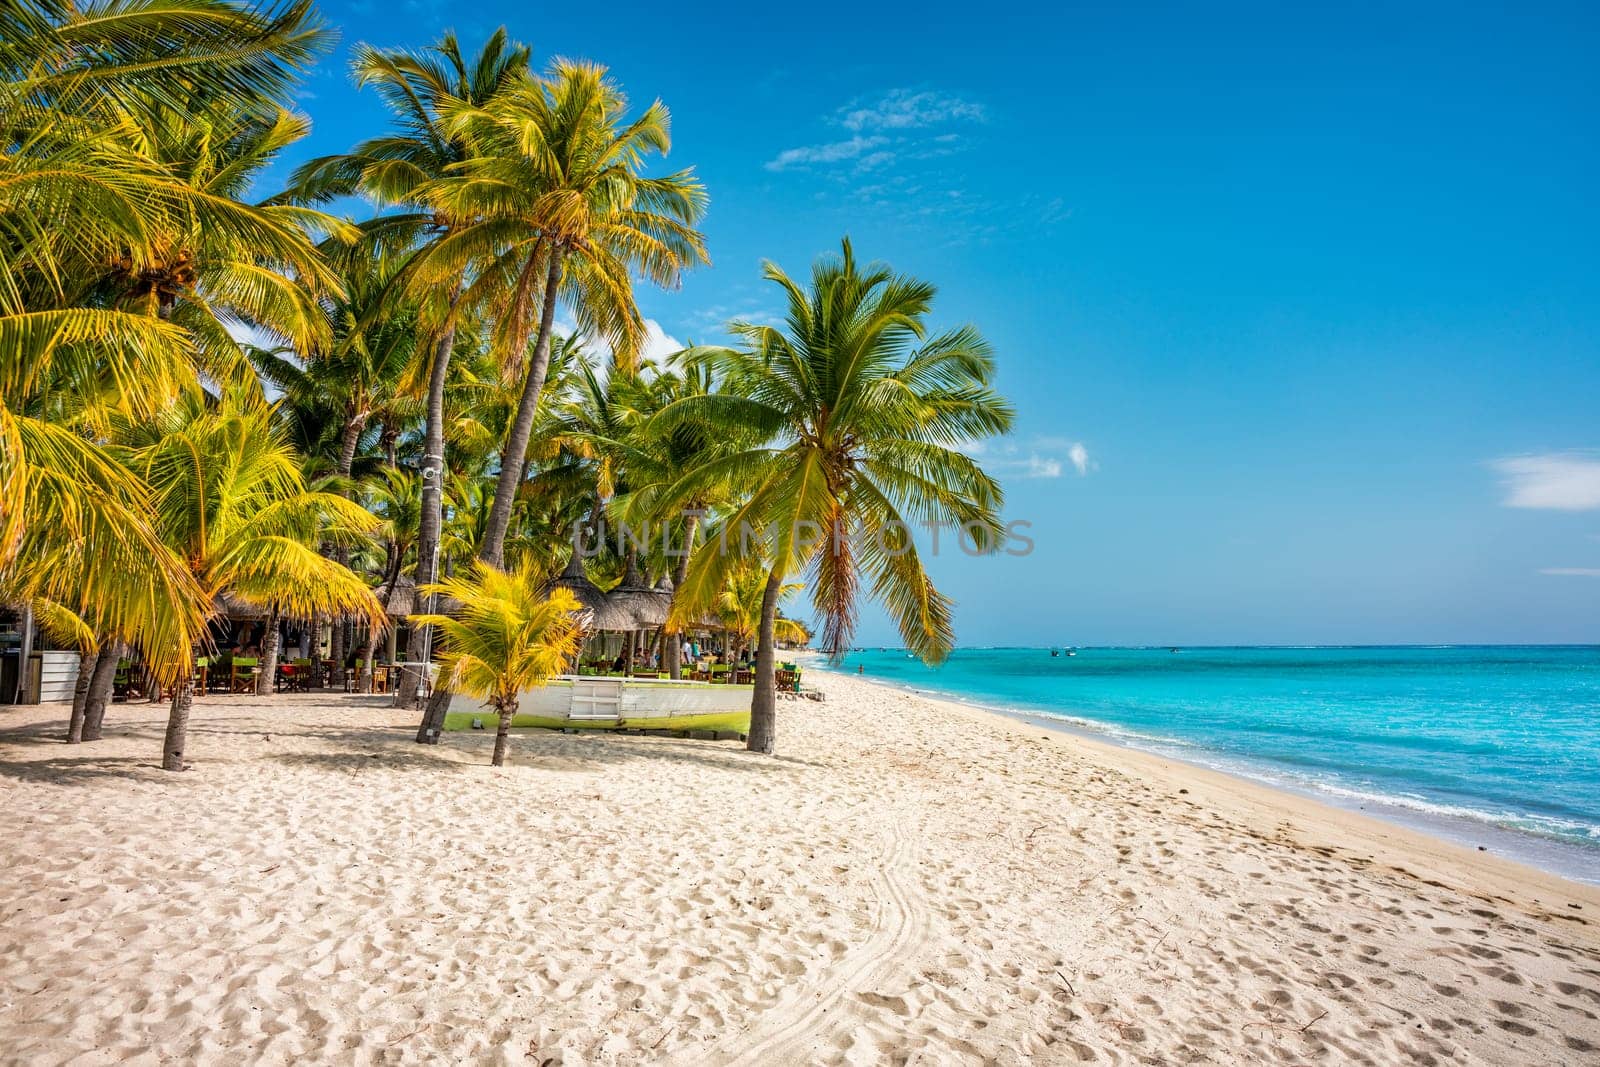 A beach with palm trees and umbrellas on Le morne Brabant beach in Mauriutius. Tropical crystal ocean with Le Morne beach and luxury beach in Mauritius. Le Morne beach with palm trees, white sand and luxury resorts, Mauritius. by DaLiu